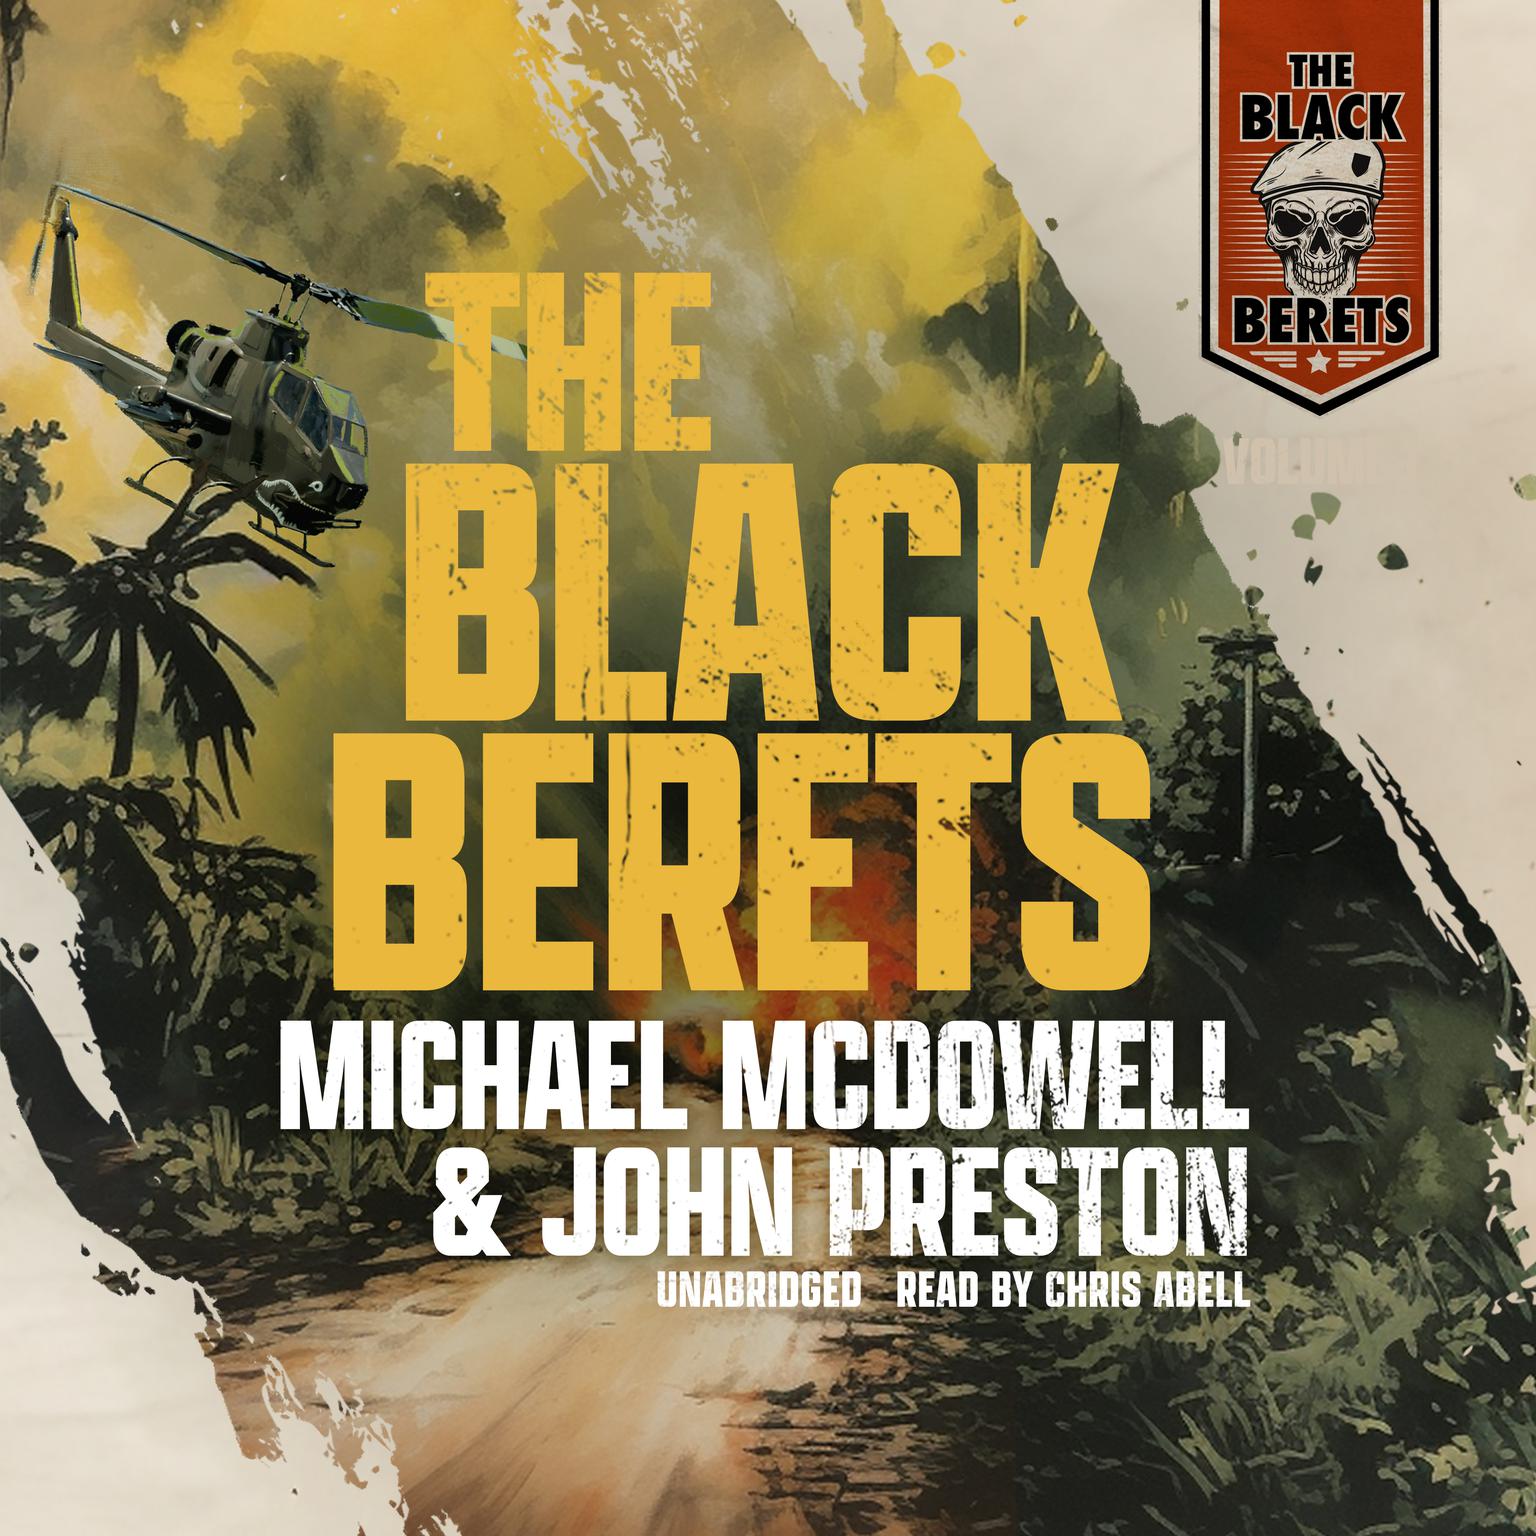 The Black Berets, Vol. 1 Audiobook, by Michael McDowell